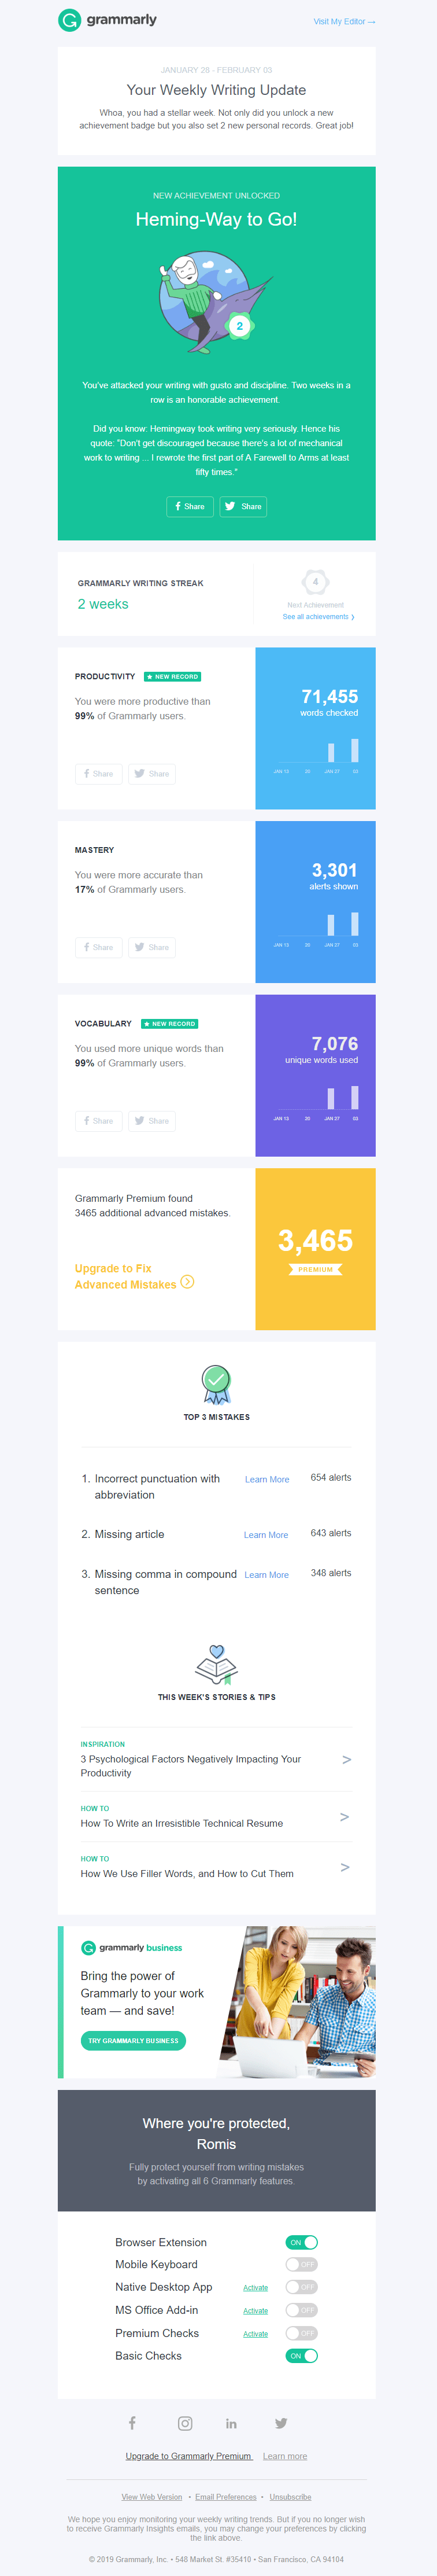 Personalized newsletter from Grammarly